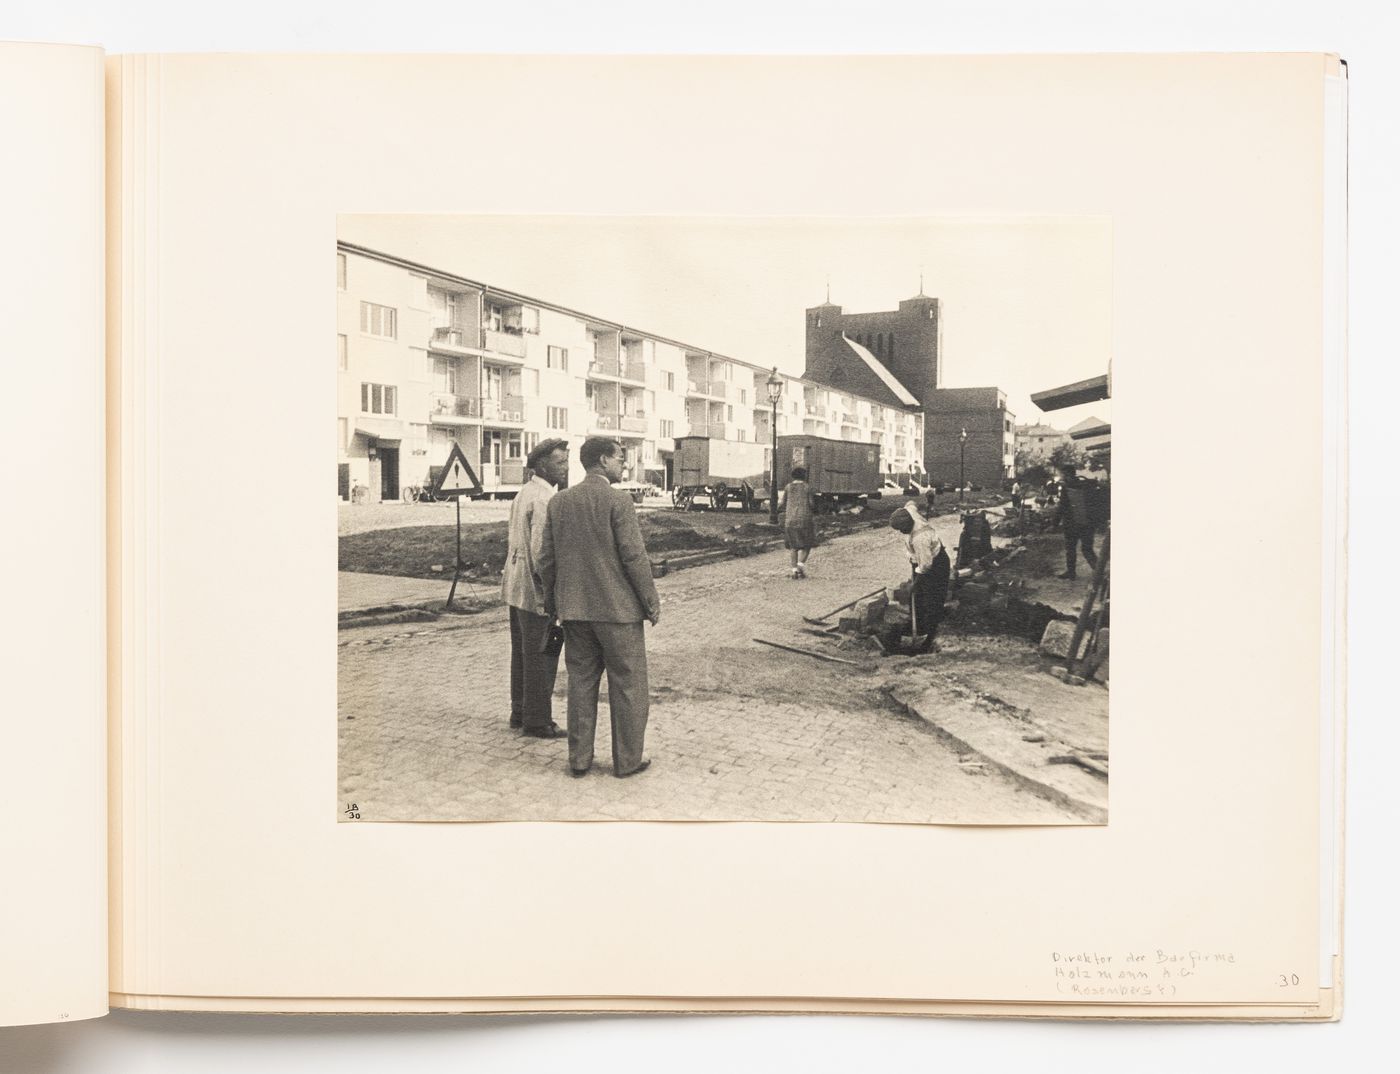 Exterior view of type A housing units with the Director of Holzmann A.G., Mr. Rosenberg [?], and a foreman [?], Hellerhof Housing Estate, Frankfurt am Main, Germany